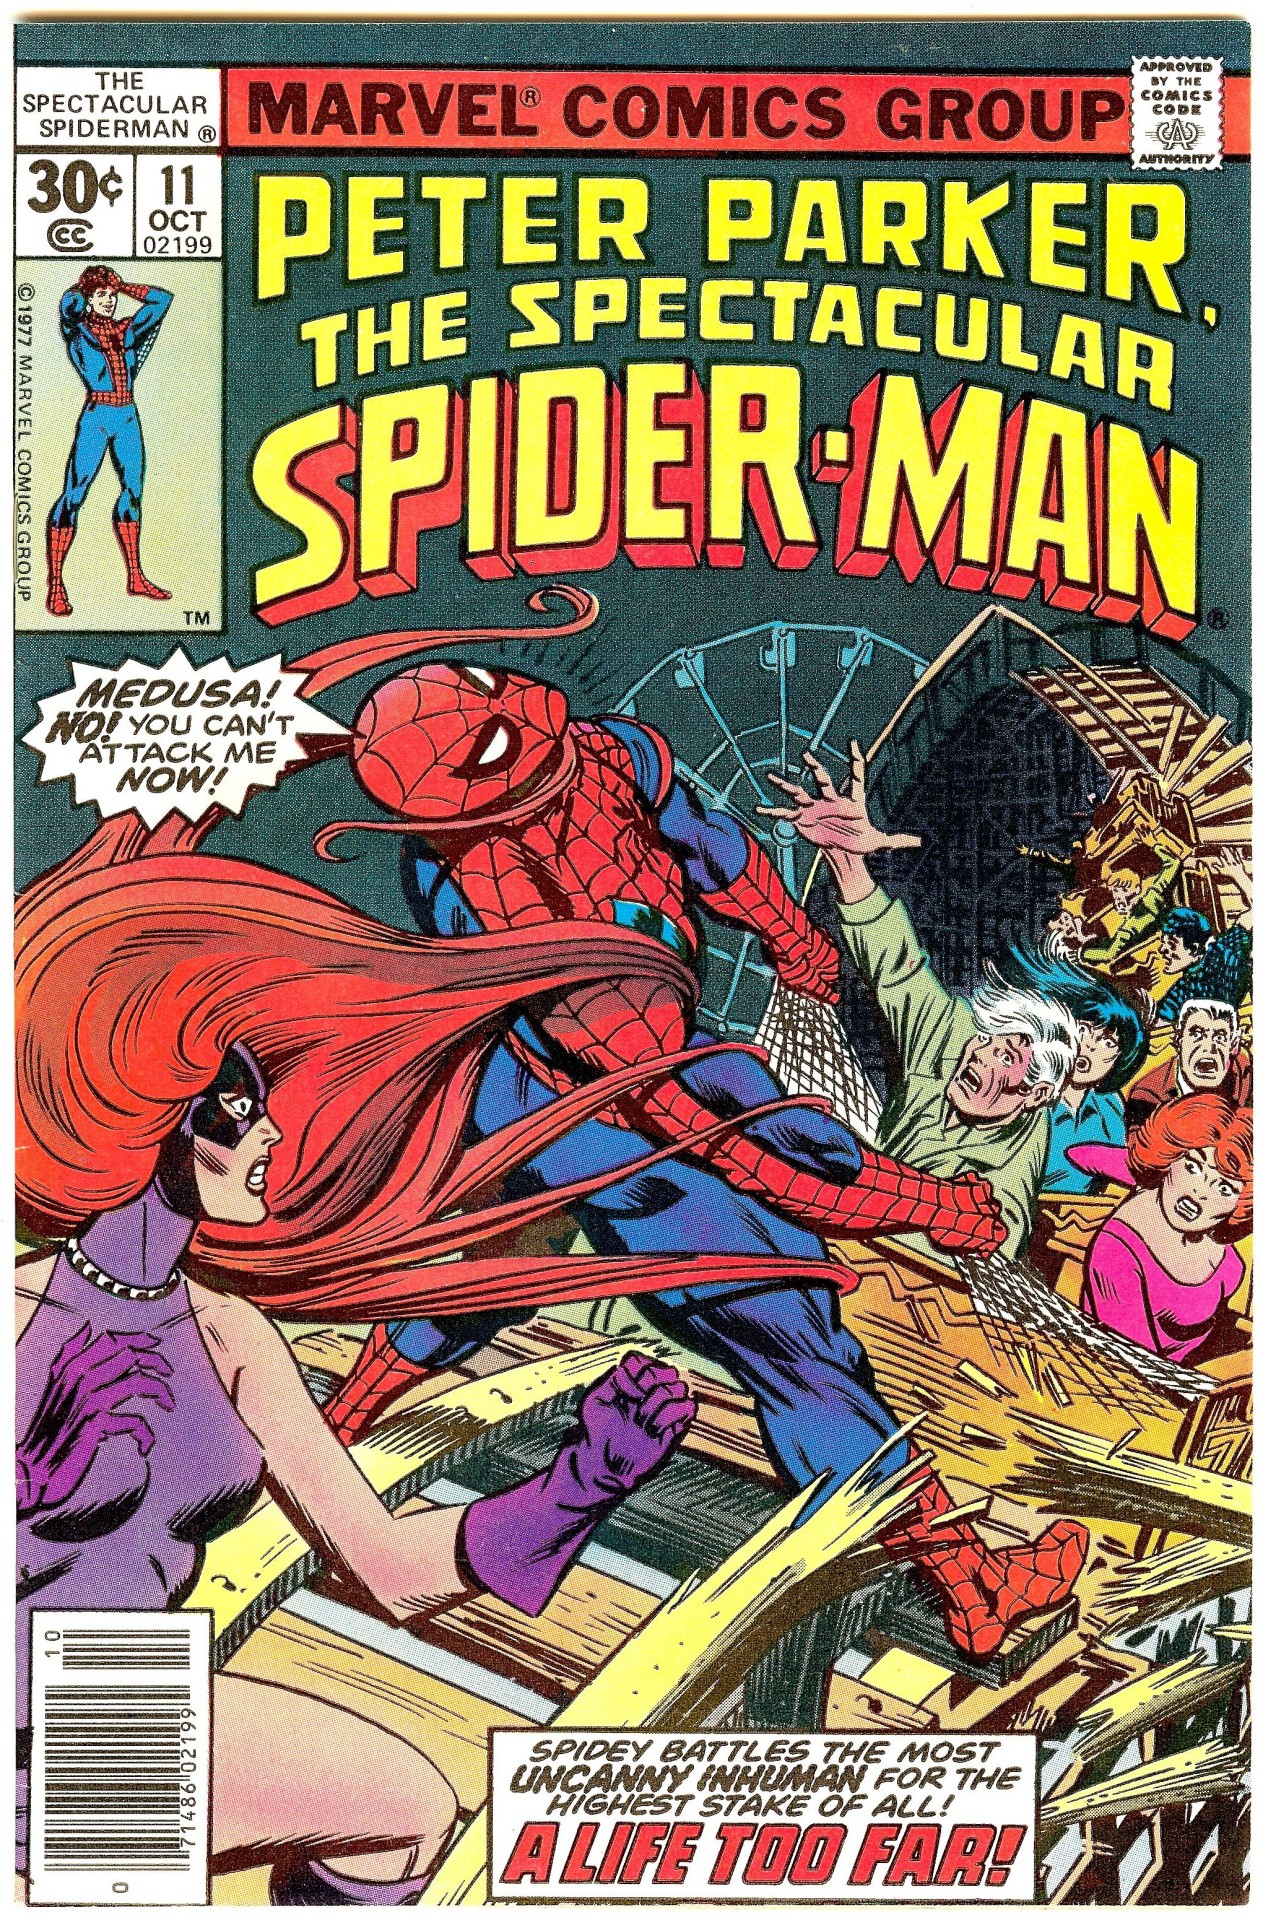 comicbookcollecting: Peter Parker , The...